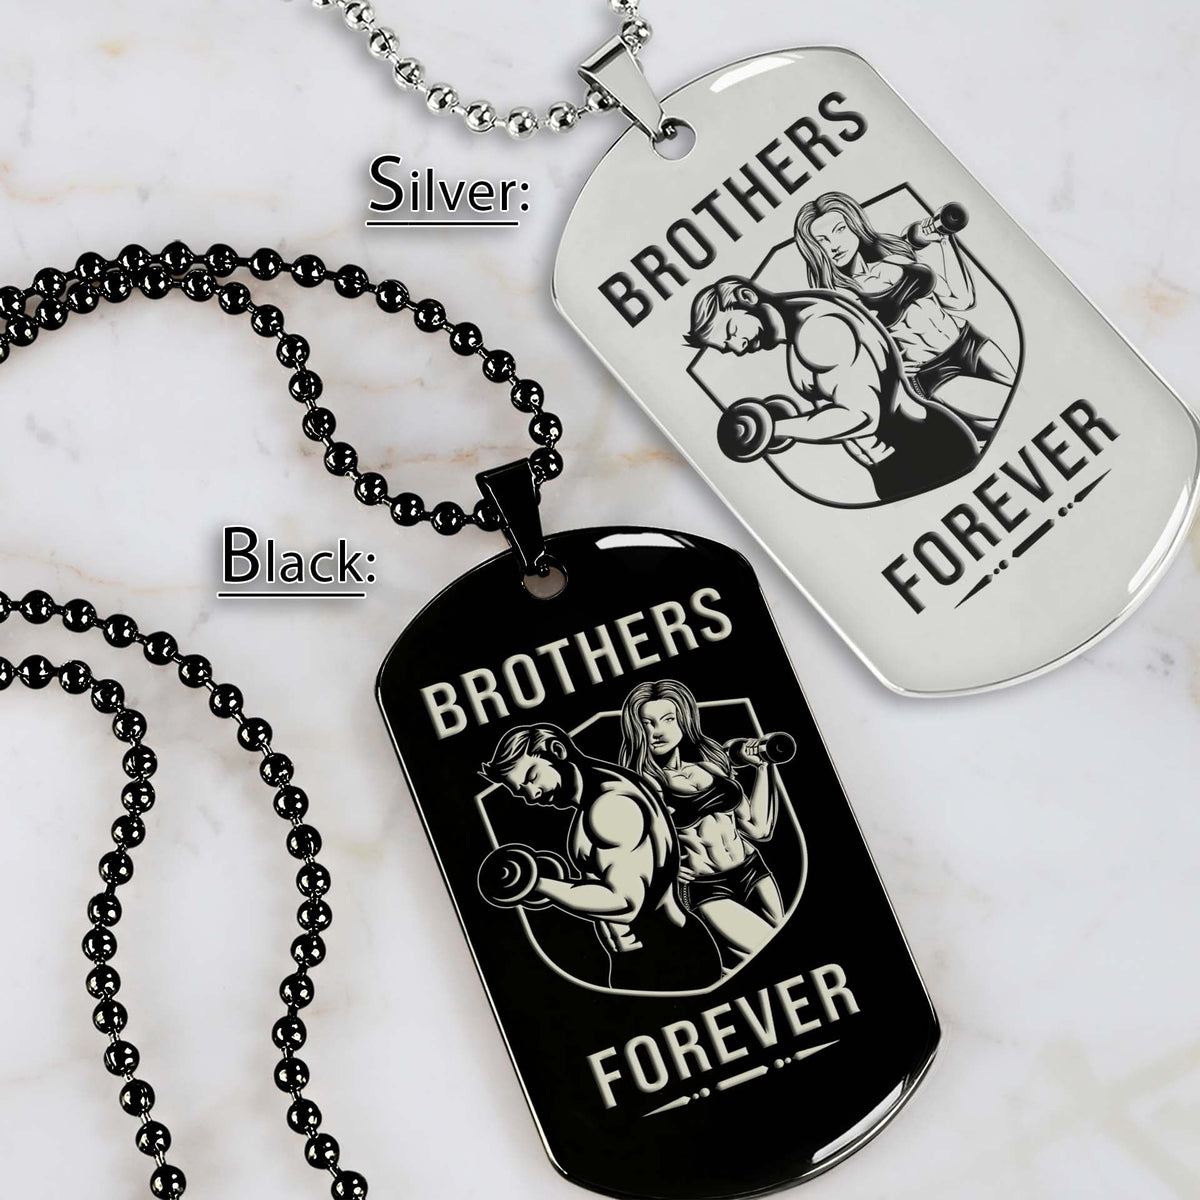 Brothers Forever - Gym - Fitness Center - Workout - Gym Dog Tag - Gym Necklace - Engrave Dog Tag